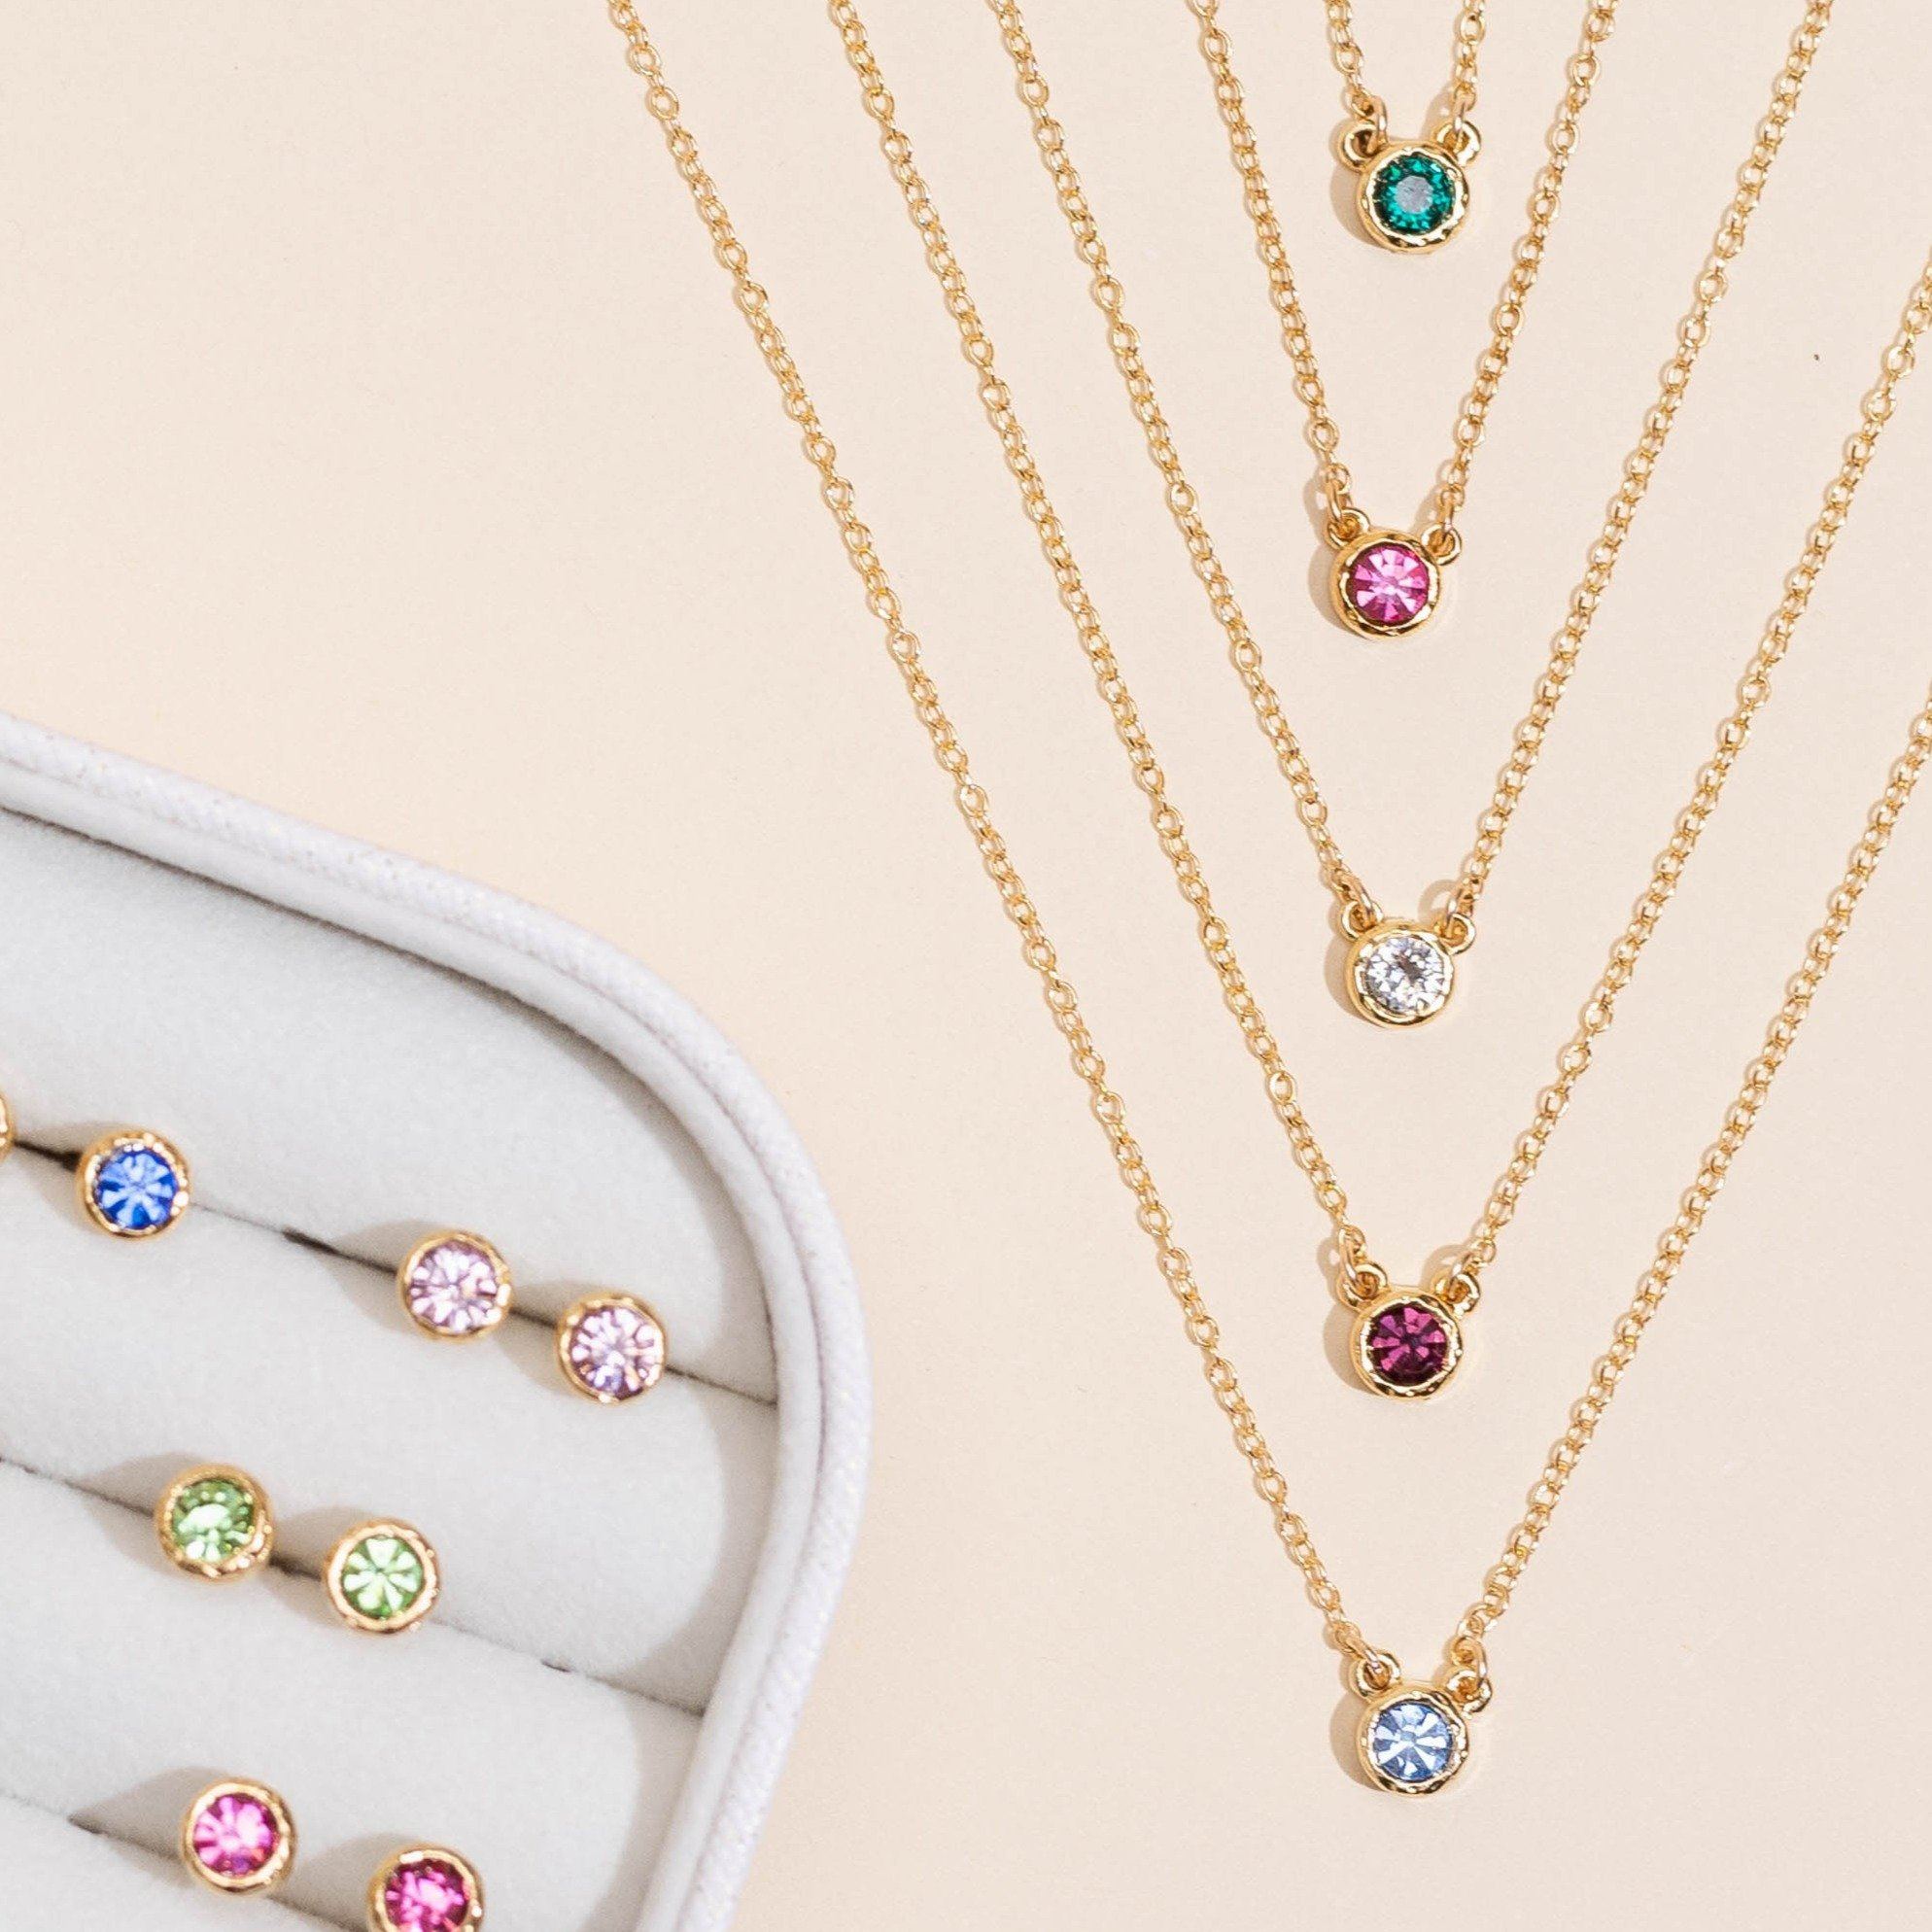 Dainty gold Birthstone Necklaces and Birthstone Studs handmade in America by Katie Dean Jewelry